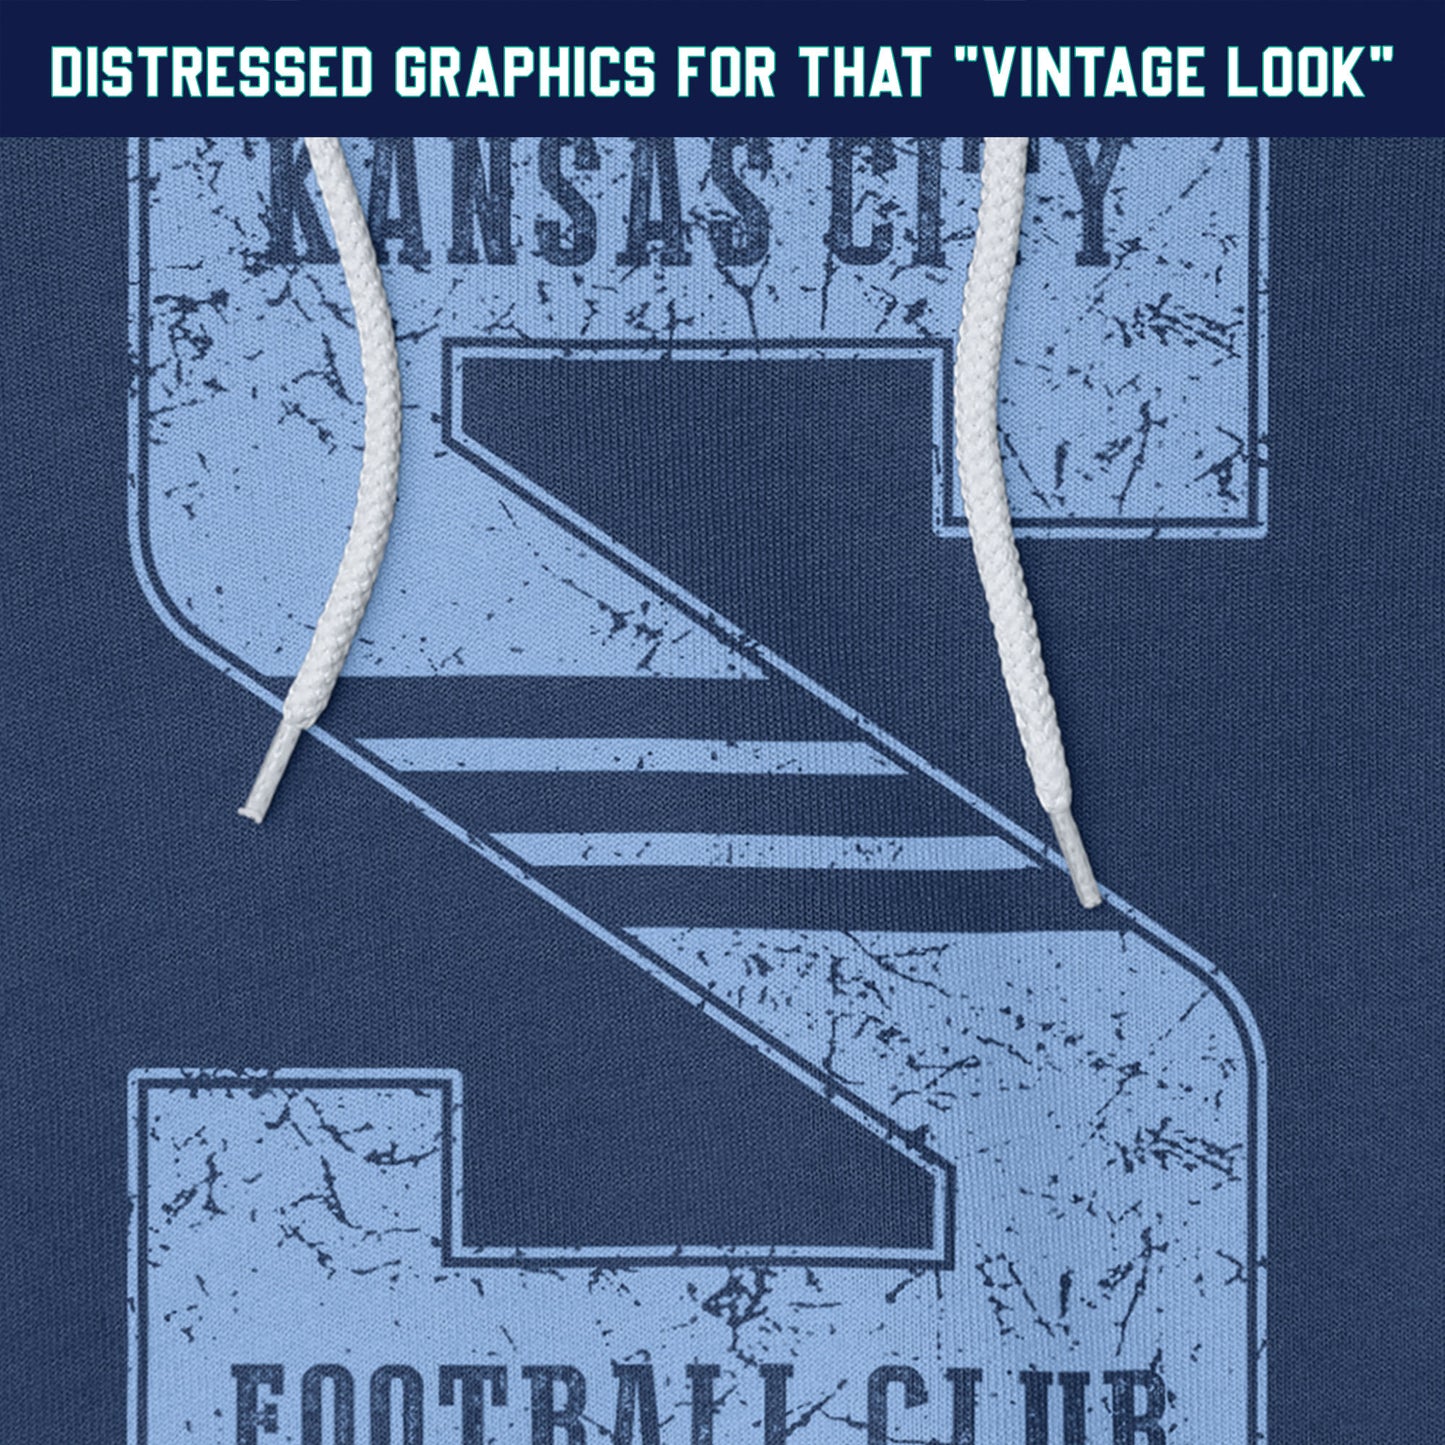 KC Swag Sporting Kansas City powder blue KANSAS CITY FOOTBALL CLUB in STRIPED S on navy fleece pull-over hoodie closeup details of distressed graphics